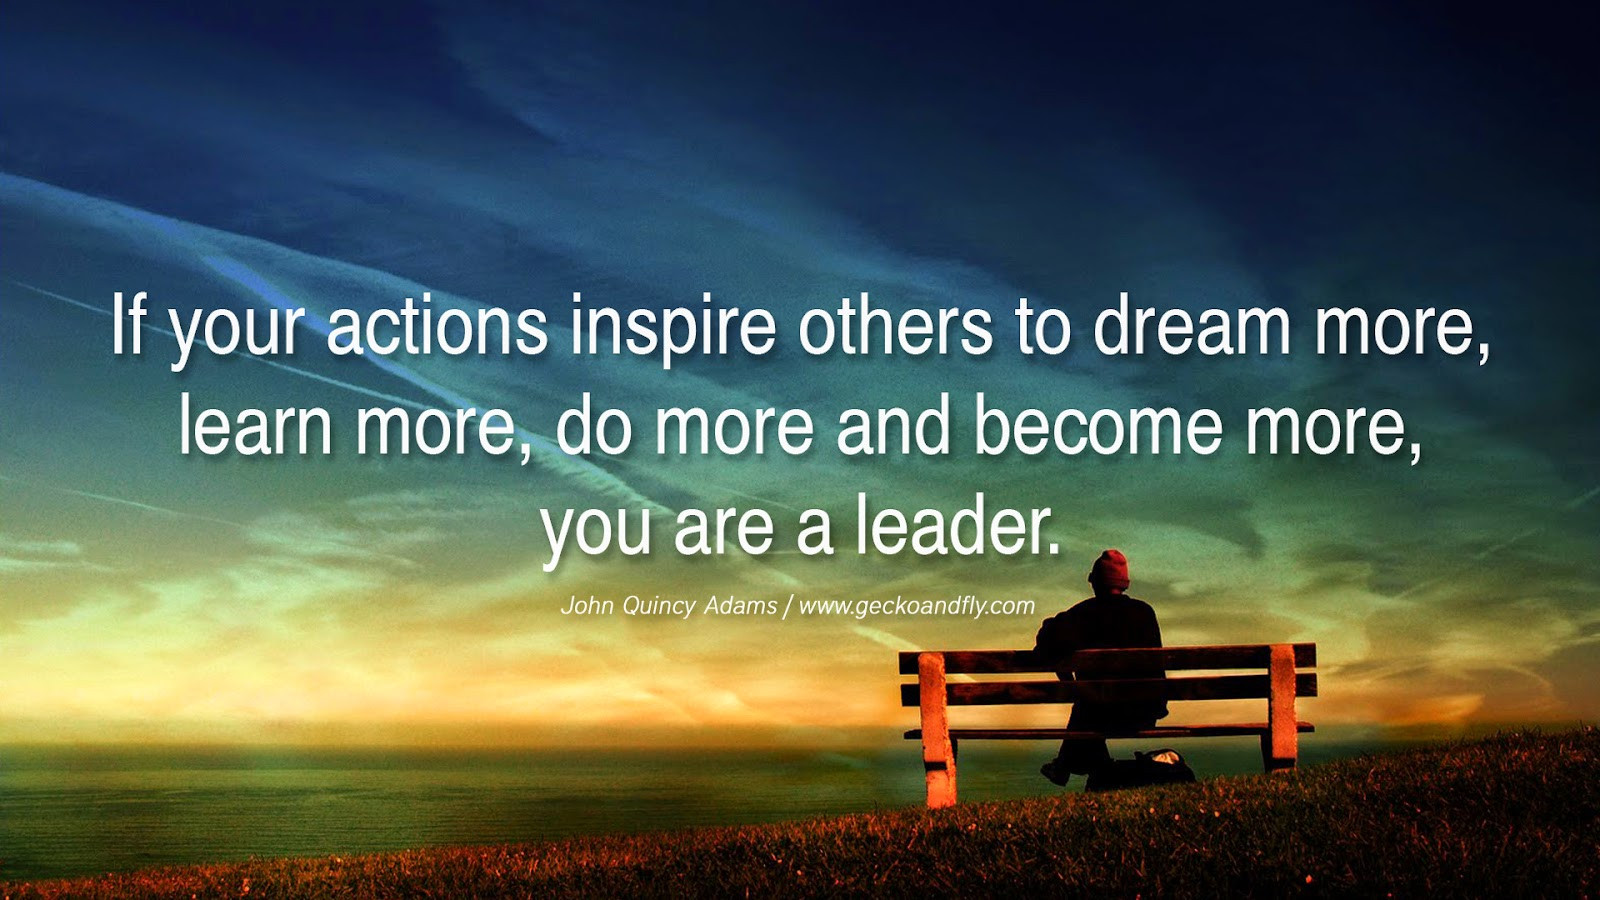 Best Quotes About Leadership
 Leadership Quotes And Sayings By Famous People And Authors